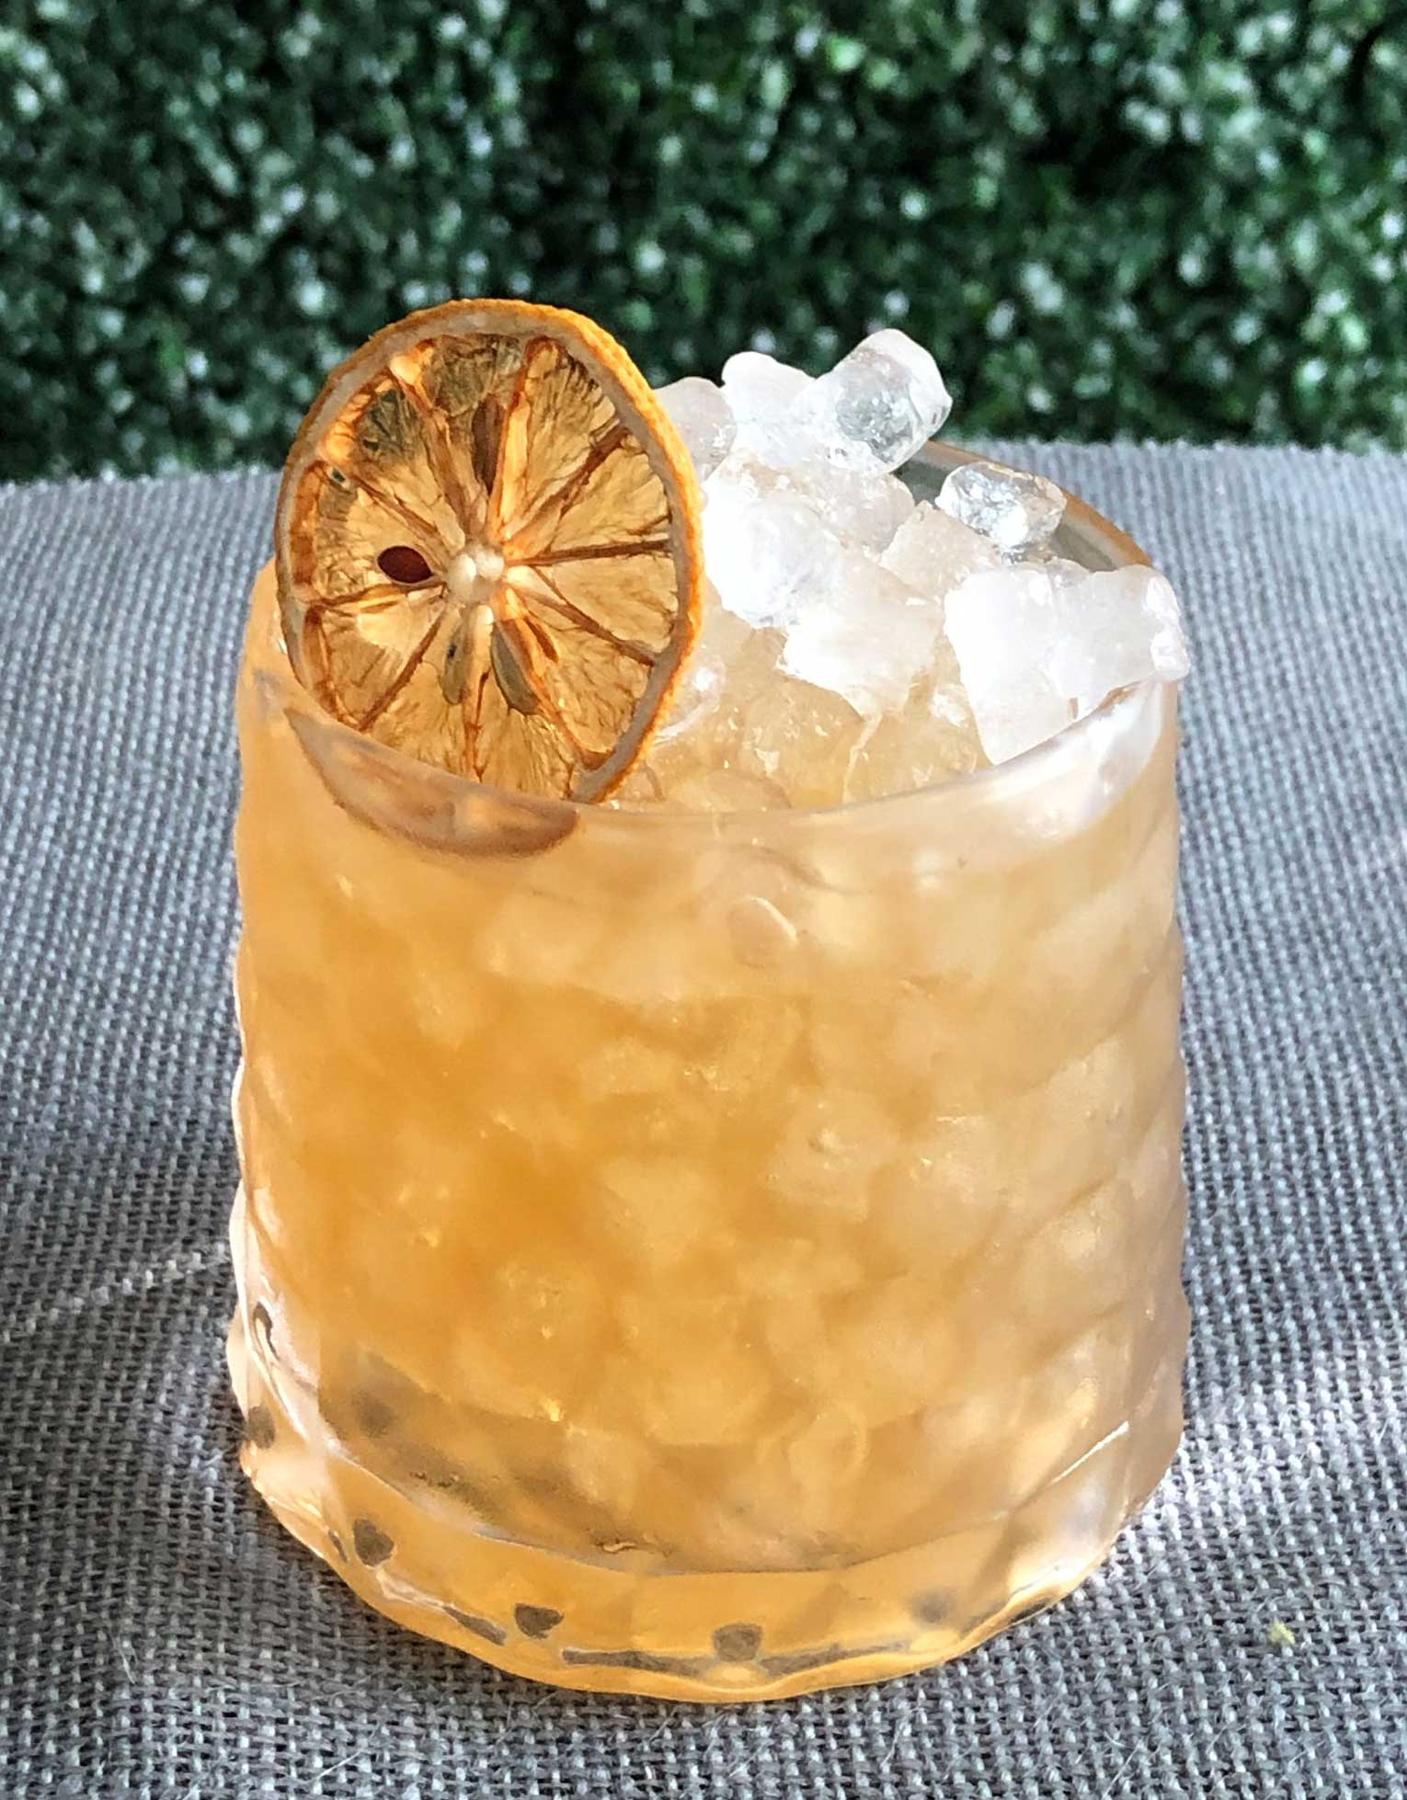 An example of the Crampon Sour, the mixed drink (drink) featuring Amaro Alta Verde, Bonal Gentiane-Quina, simple syrup, and lemon juice; photo by Lee Edwards